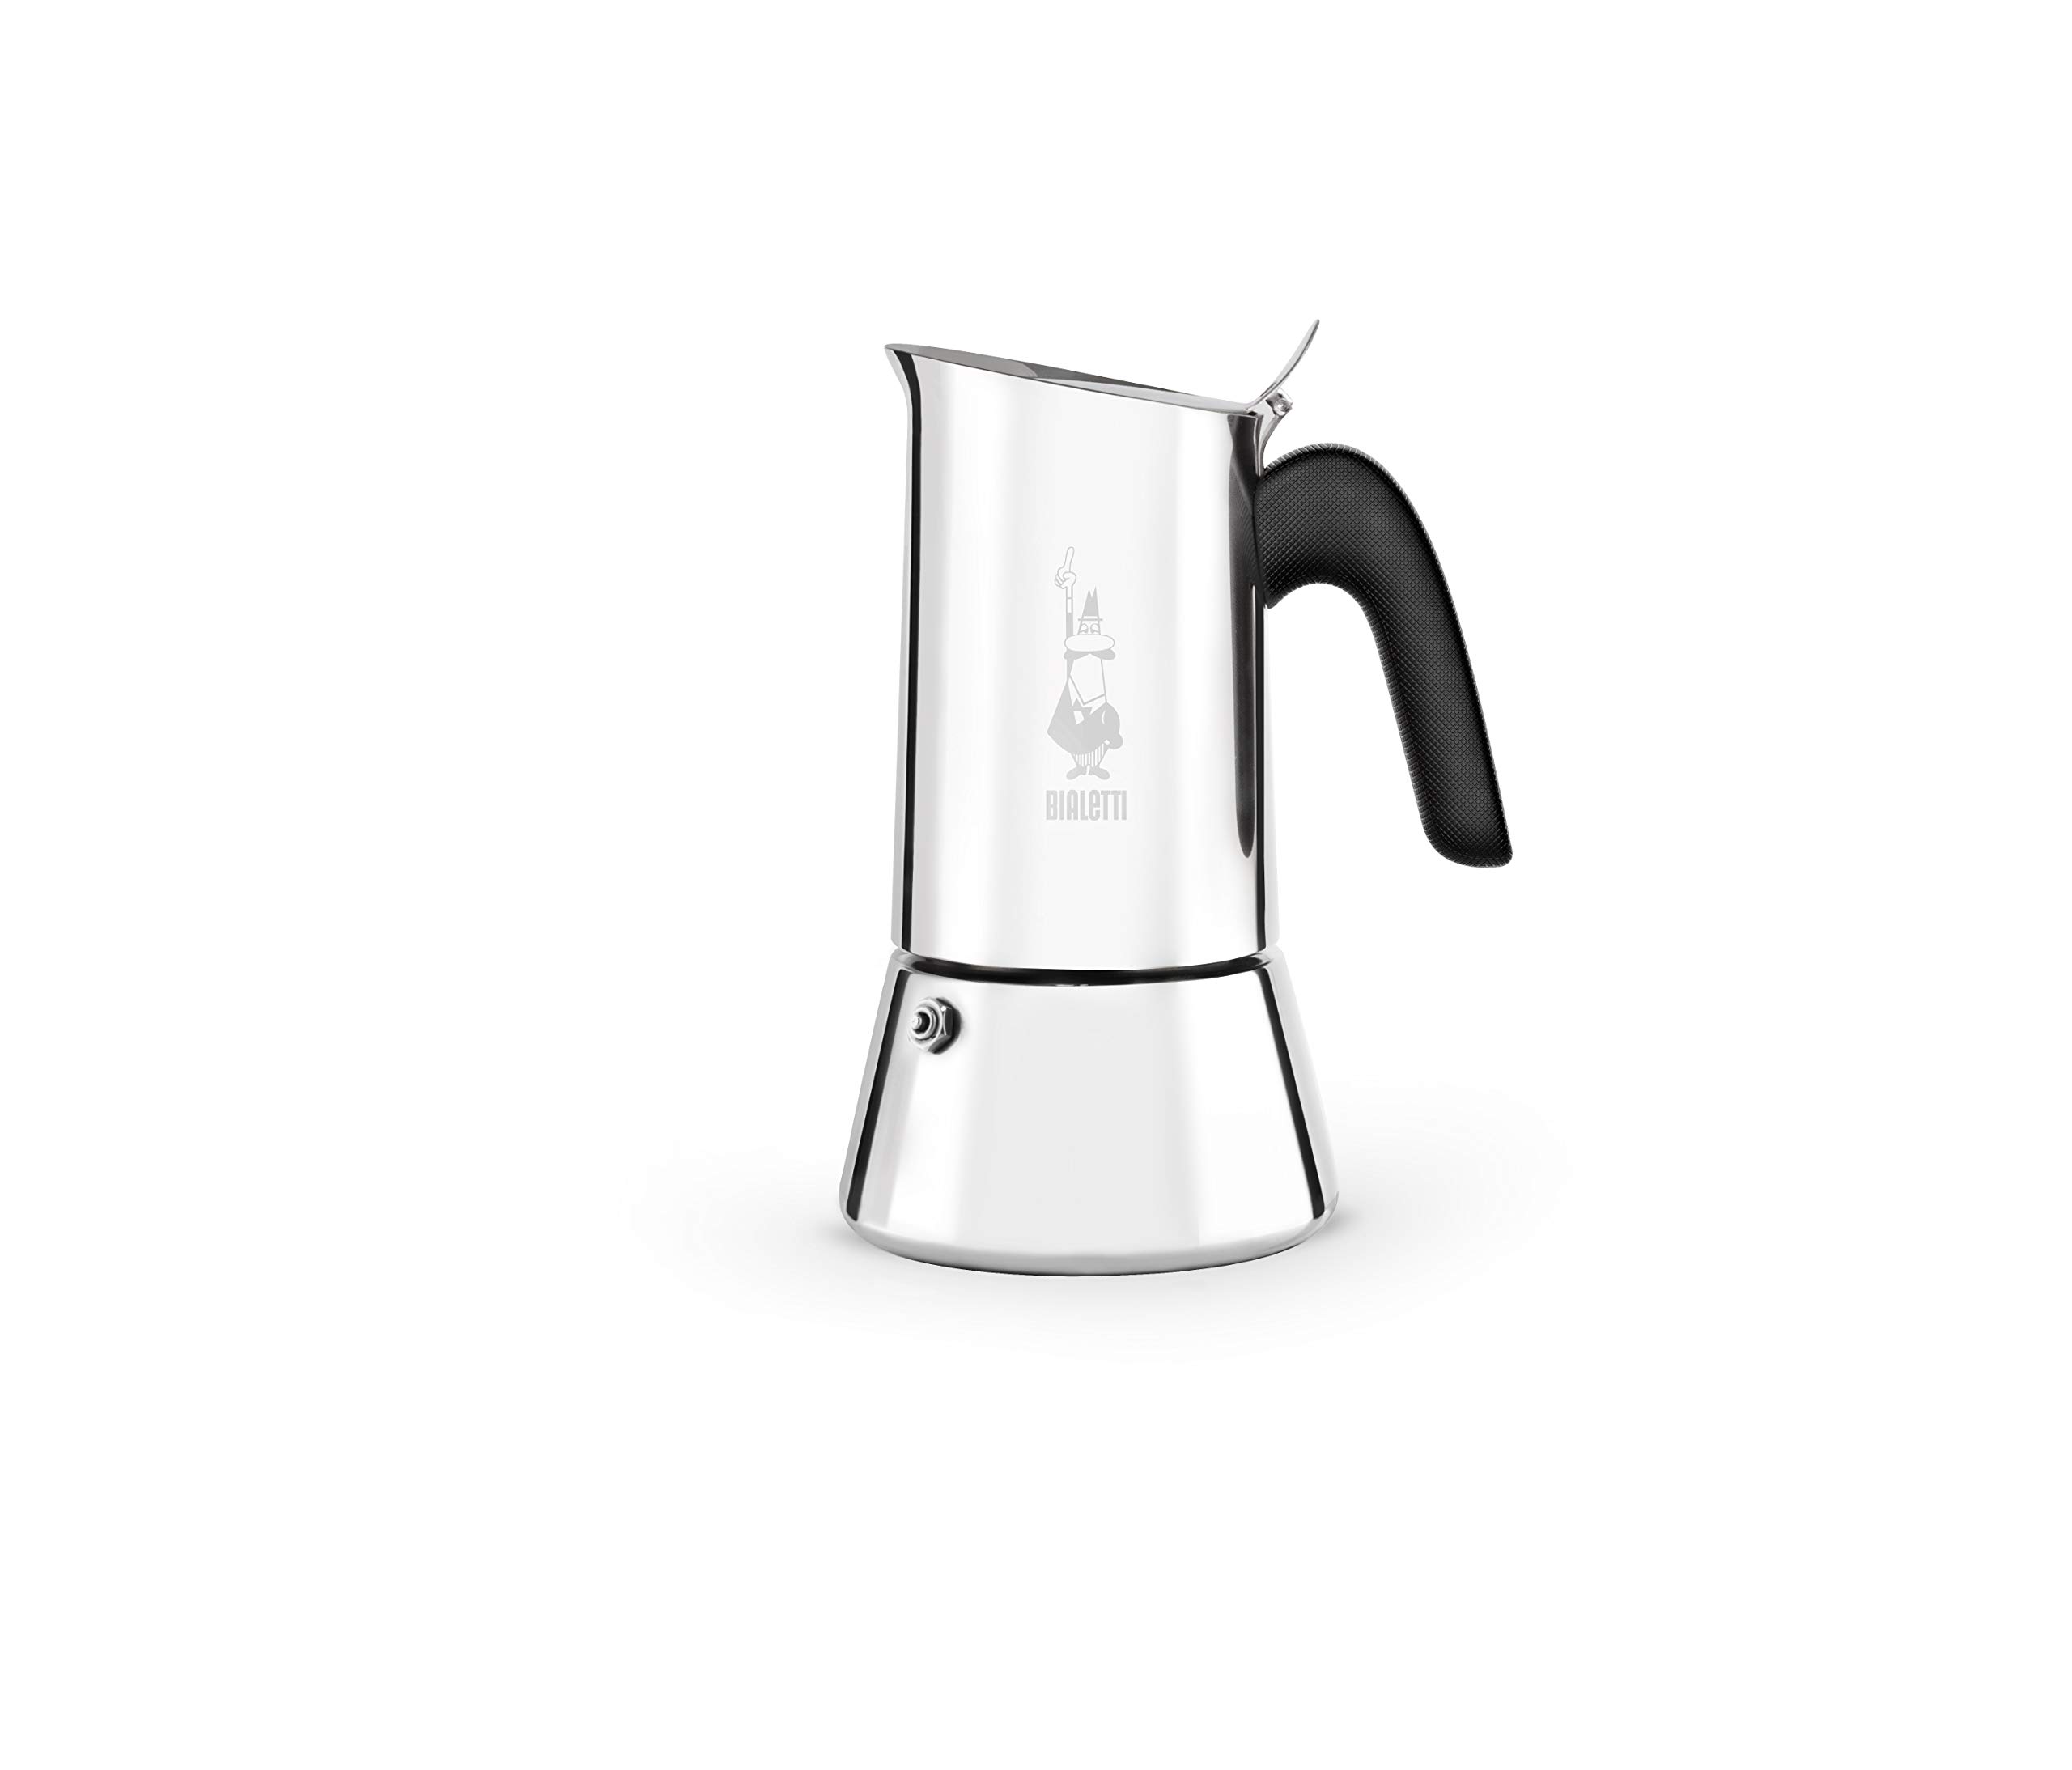 Bialetti New Venus Induction, Stovetop Coffee Maker